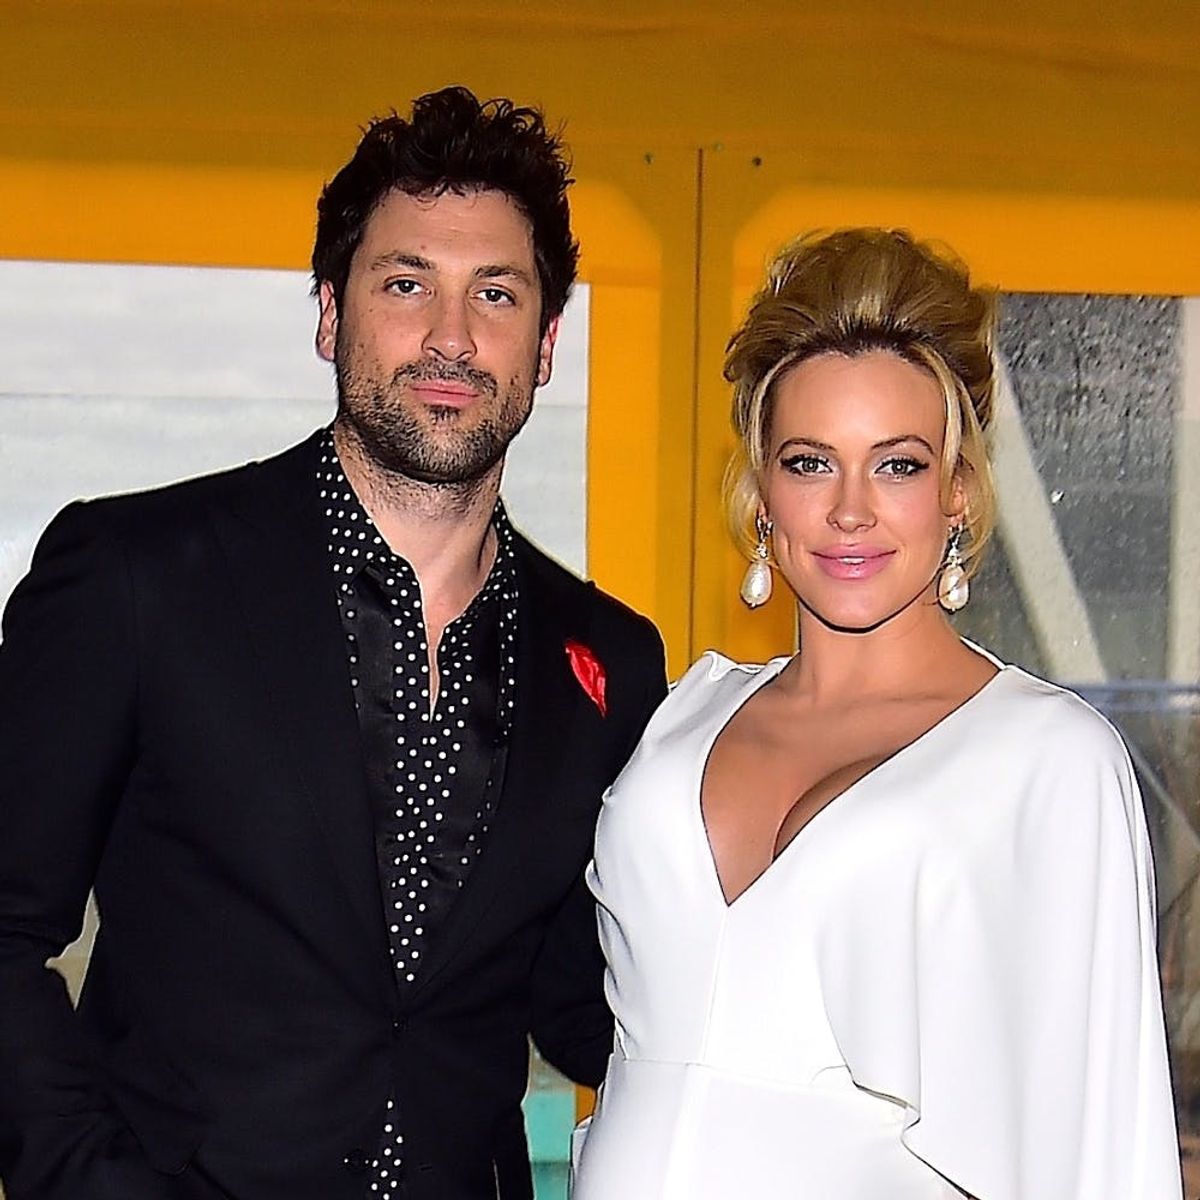 Dancing With the Stars’ Peta Murgatroyd and Maksim Chmerkovskiy Just Welcomed Their First Baby